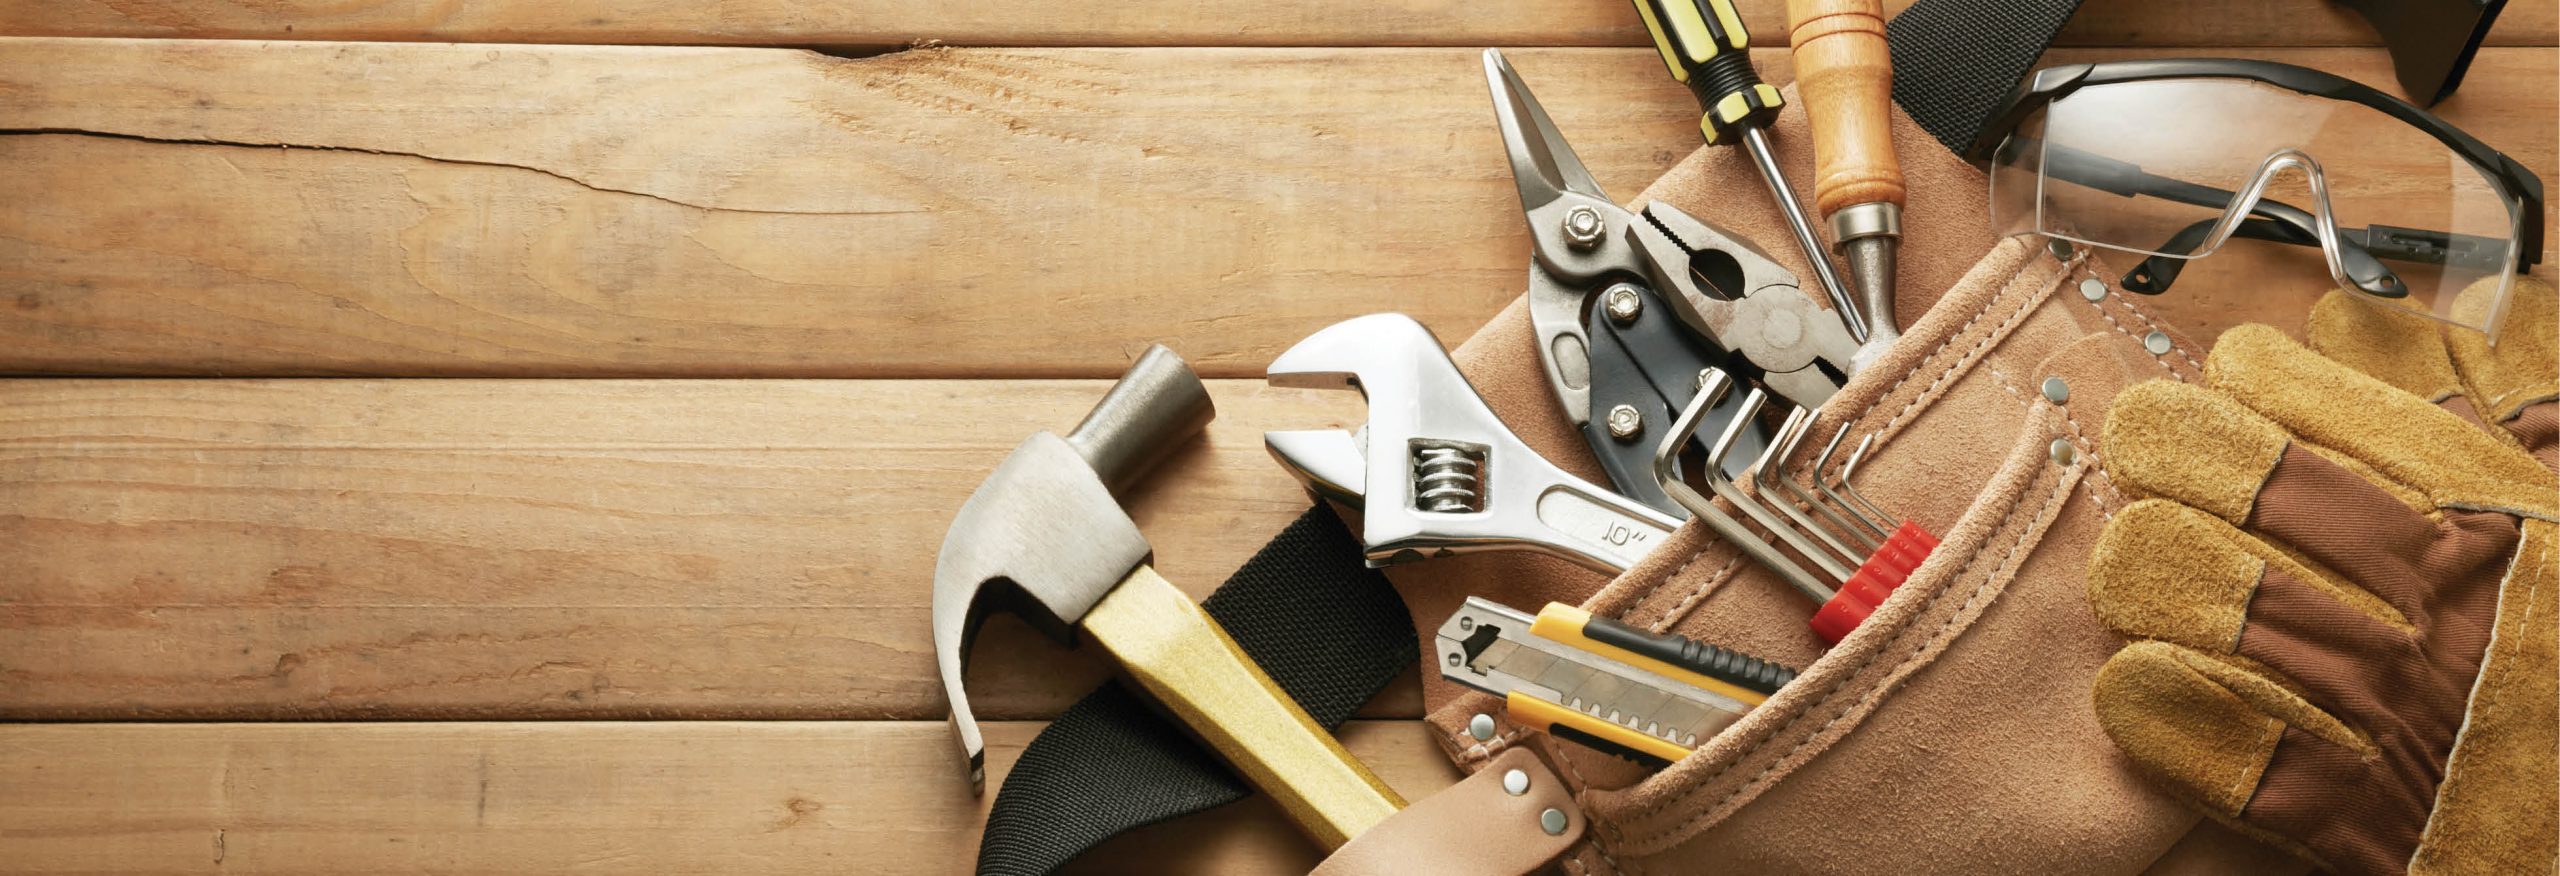 How to Contact a Handyman Company without Putting Yourself in Danger